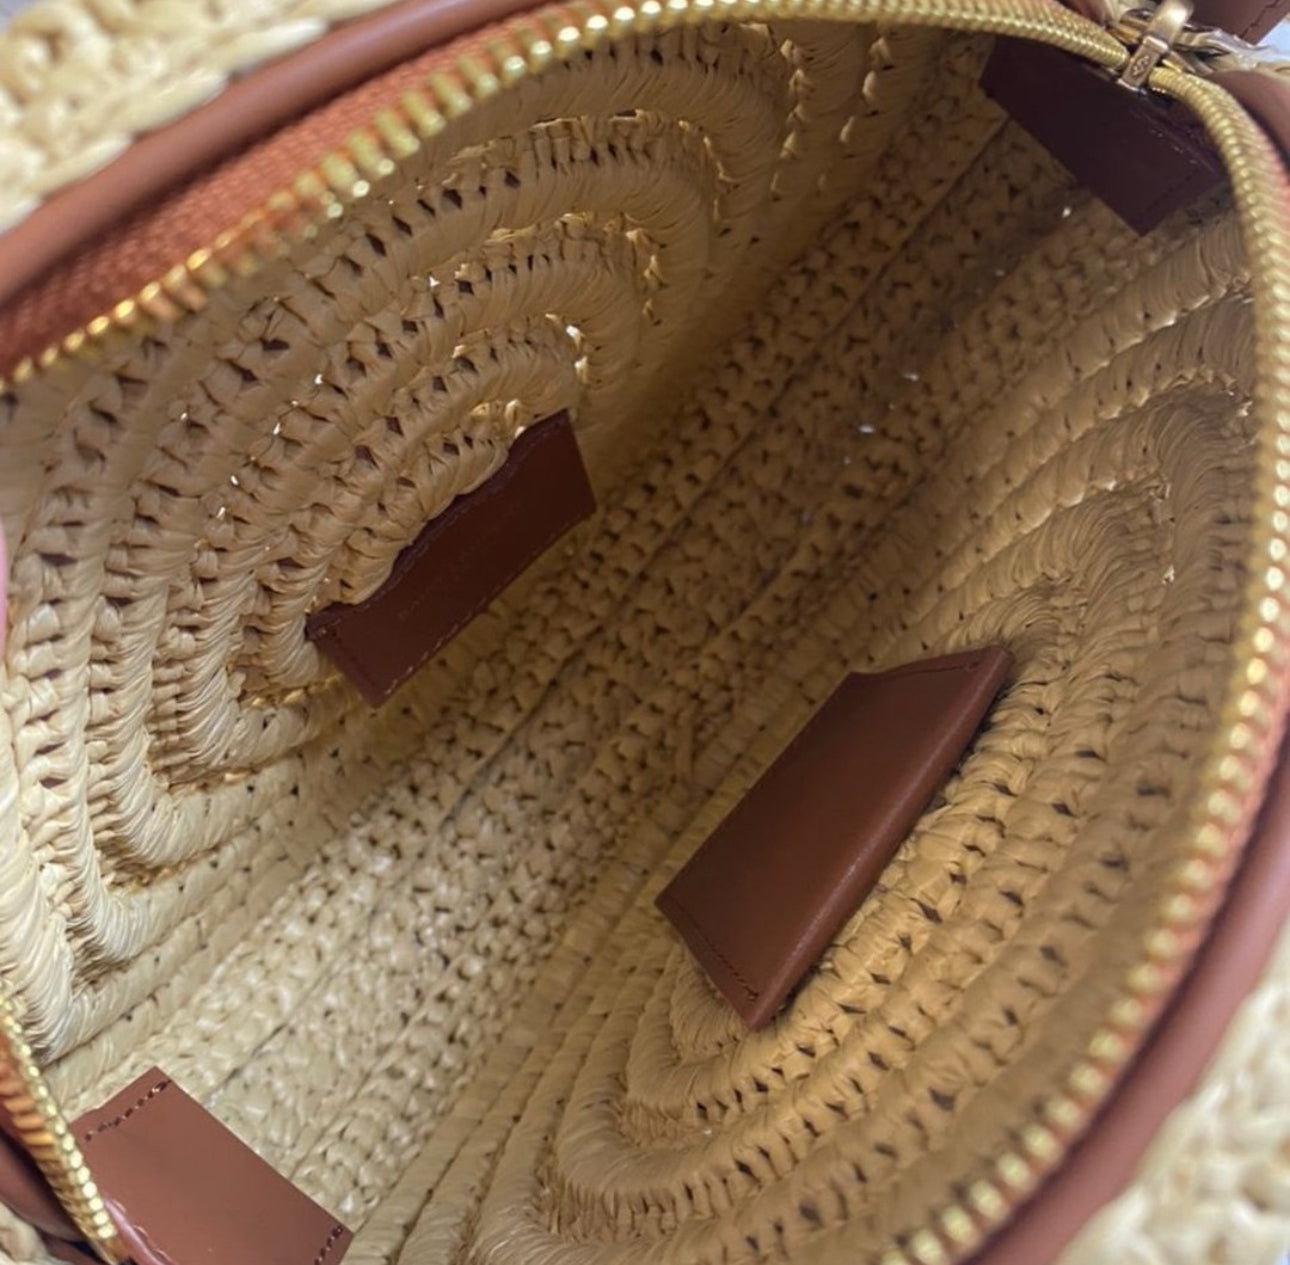 ROUND BAG IN RAFFIA AND VEGETABLE-TANNED LEATHER